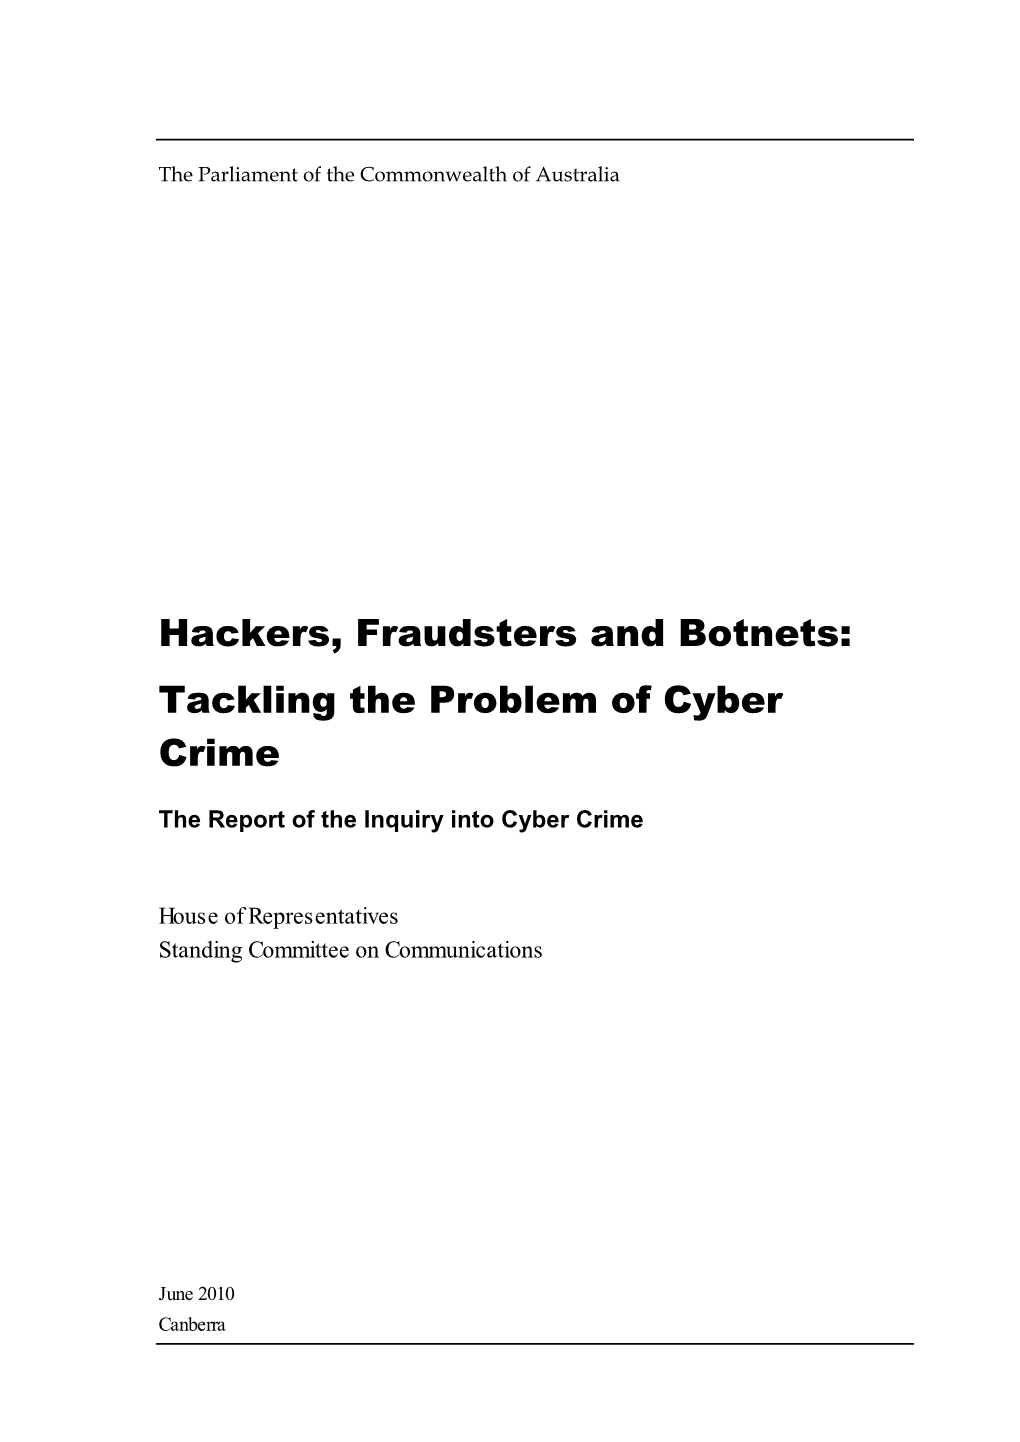 Hackers, Fraudsters and Botnets: Tackling the Problem of Cyber Crime the Report of the Inquiry Into Cyber Crime